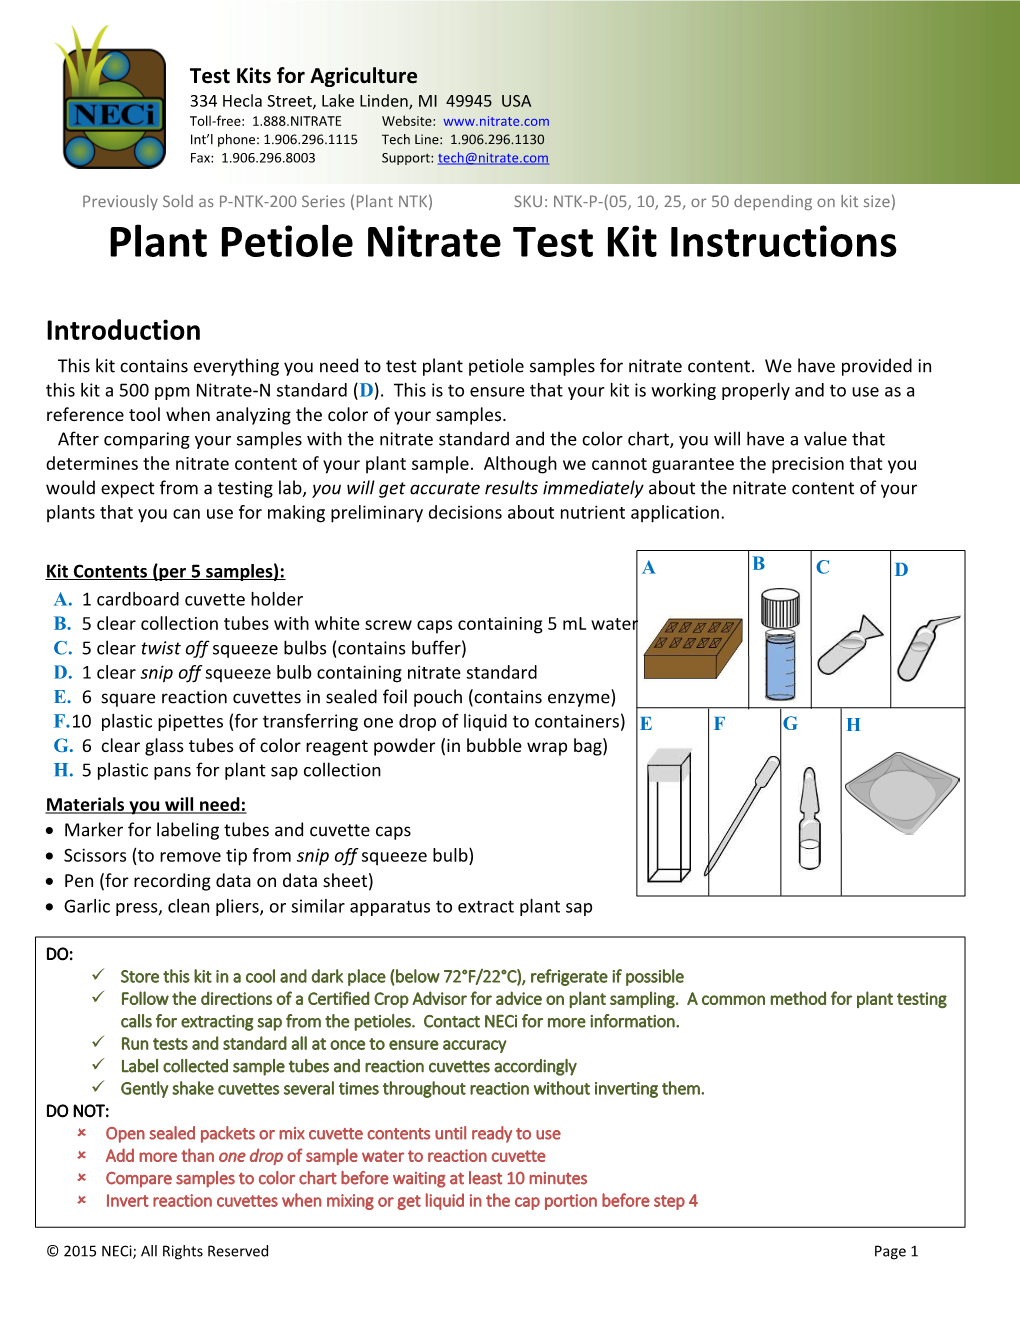 Instructions for Neci Soil Agricultural Nitrate Test Kit